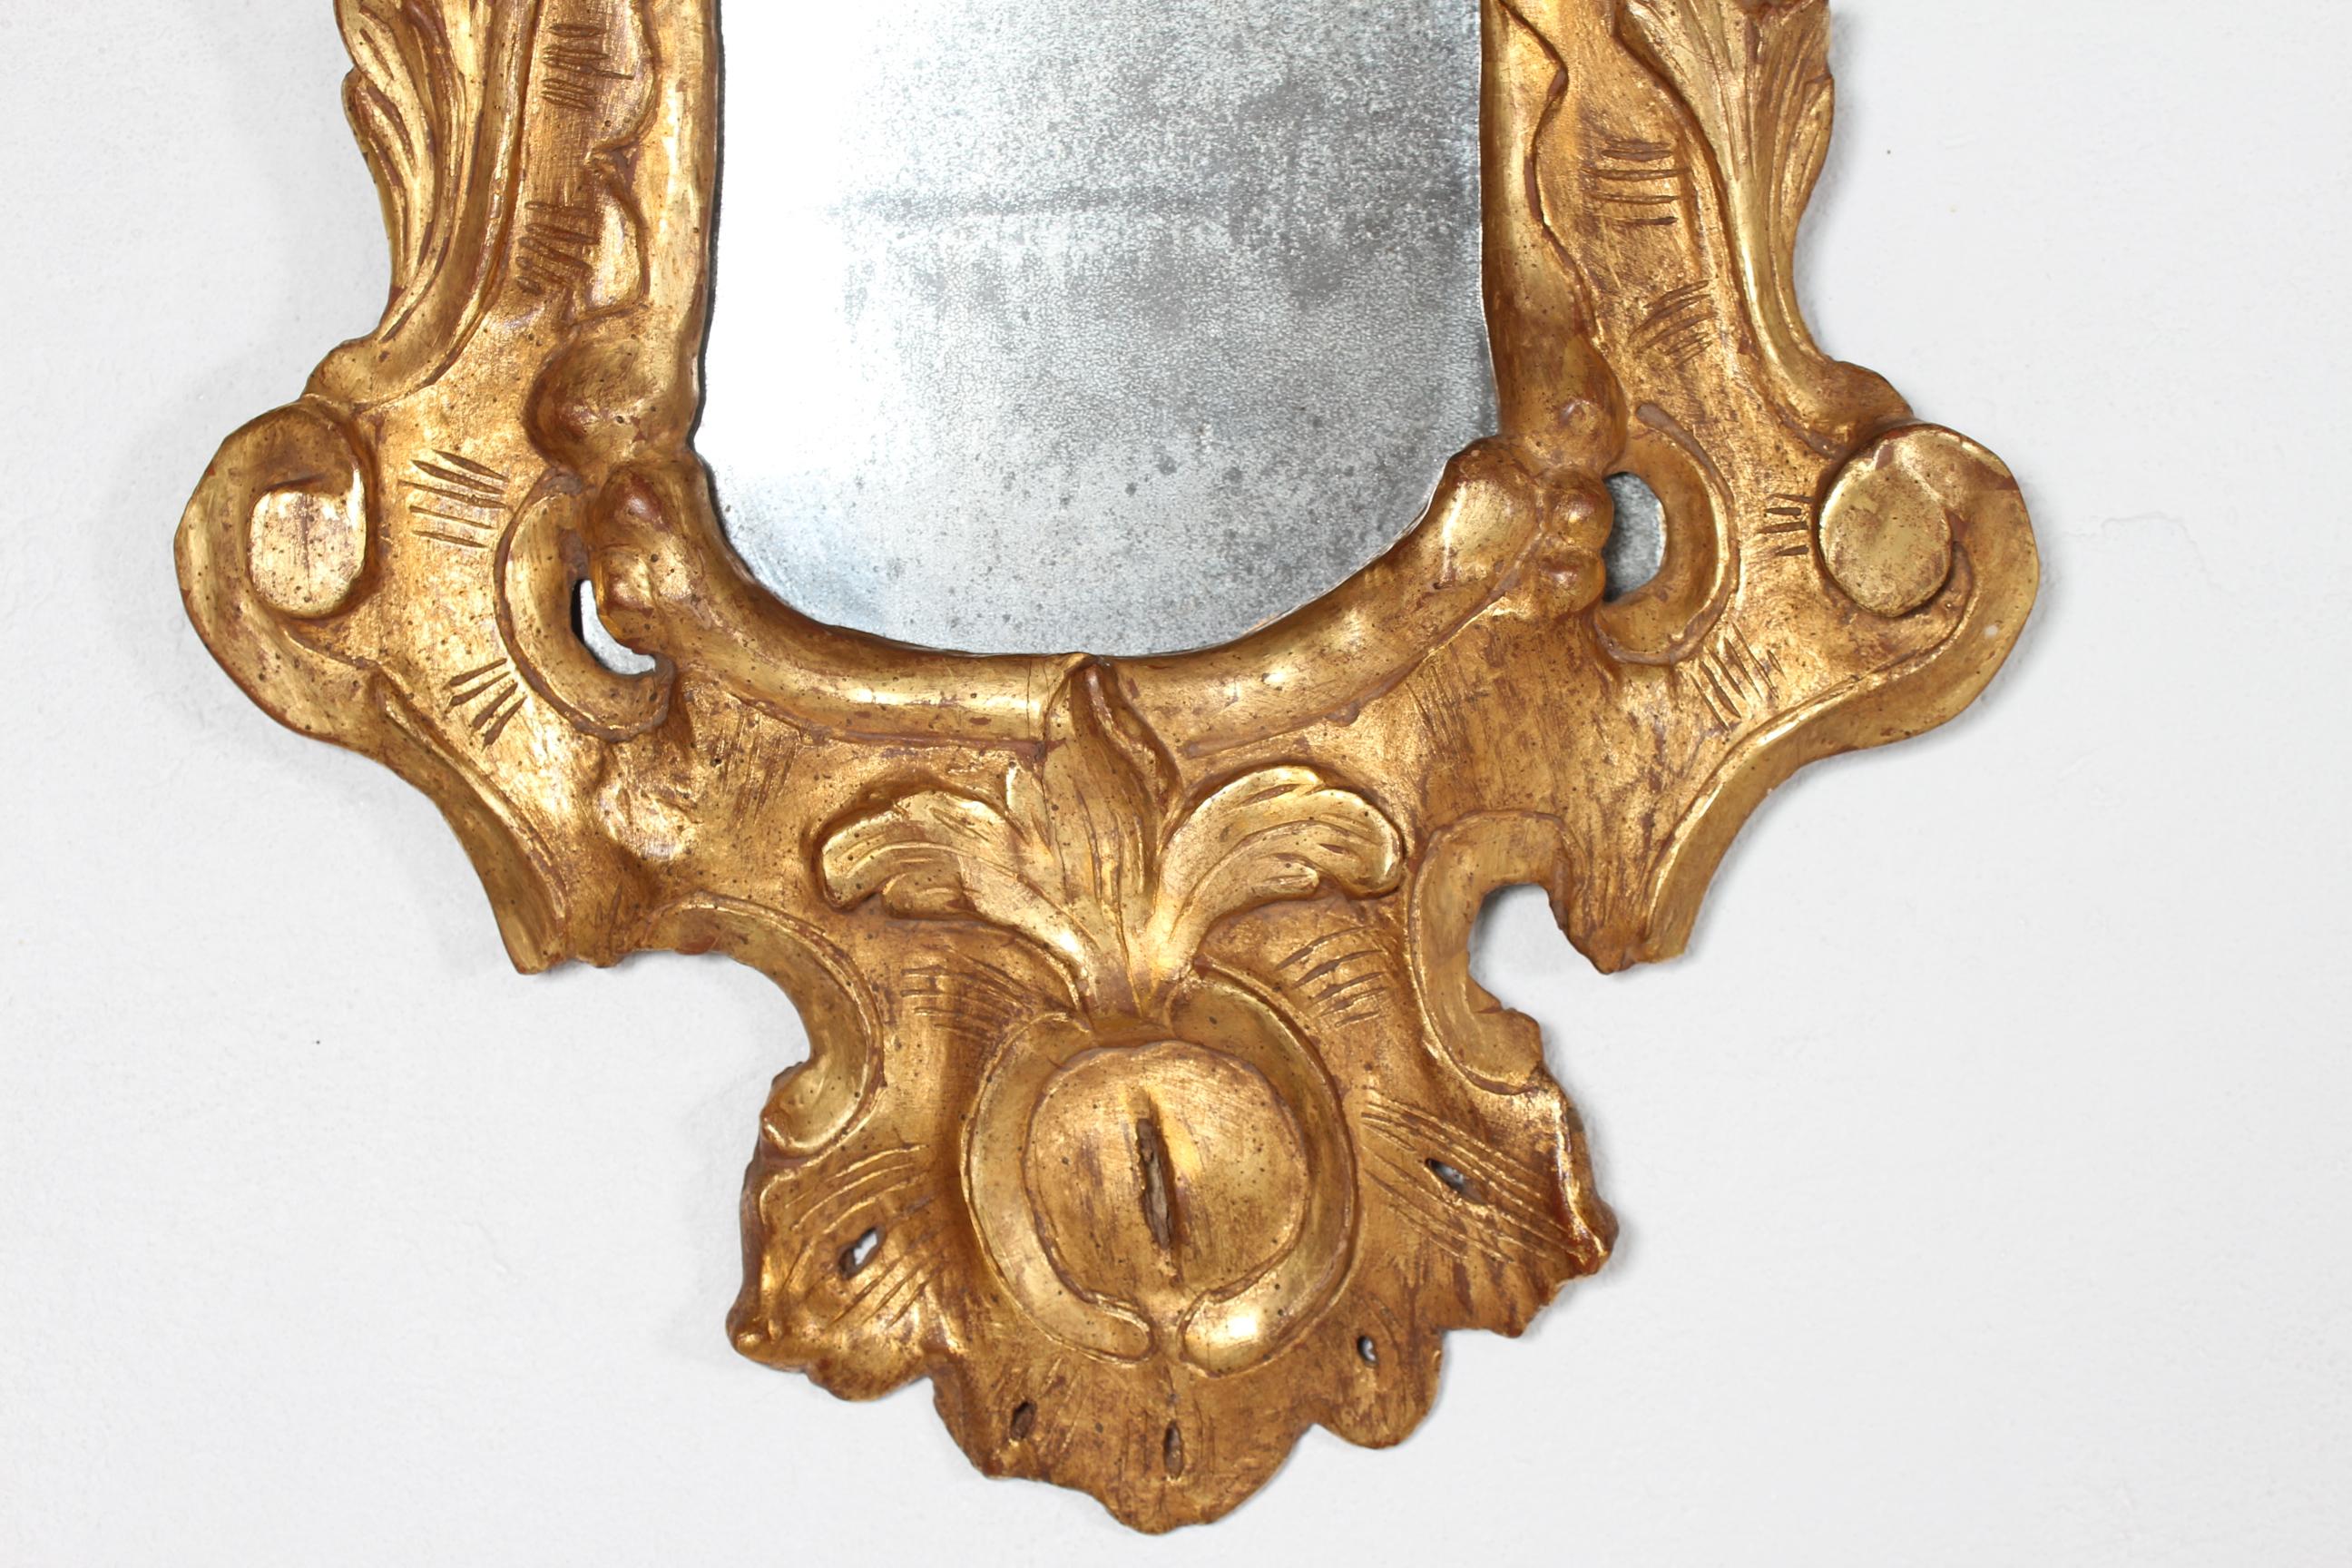 Italian European Rococo Giltwood Mirror with Openwork Ornaments + Old Mirror Glass 1800s For Sale